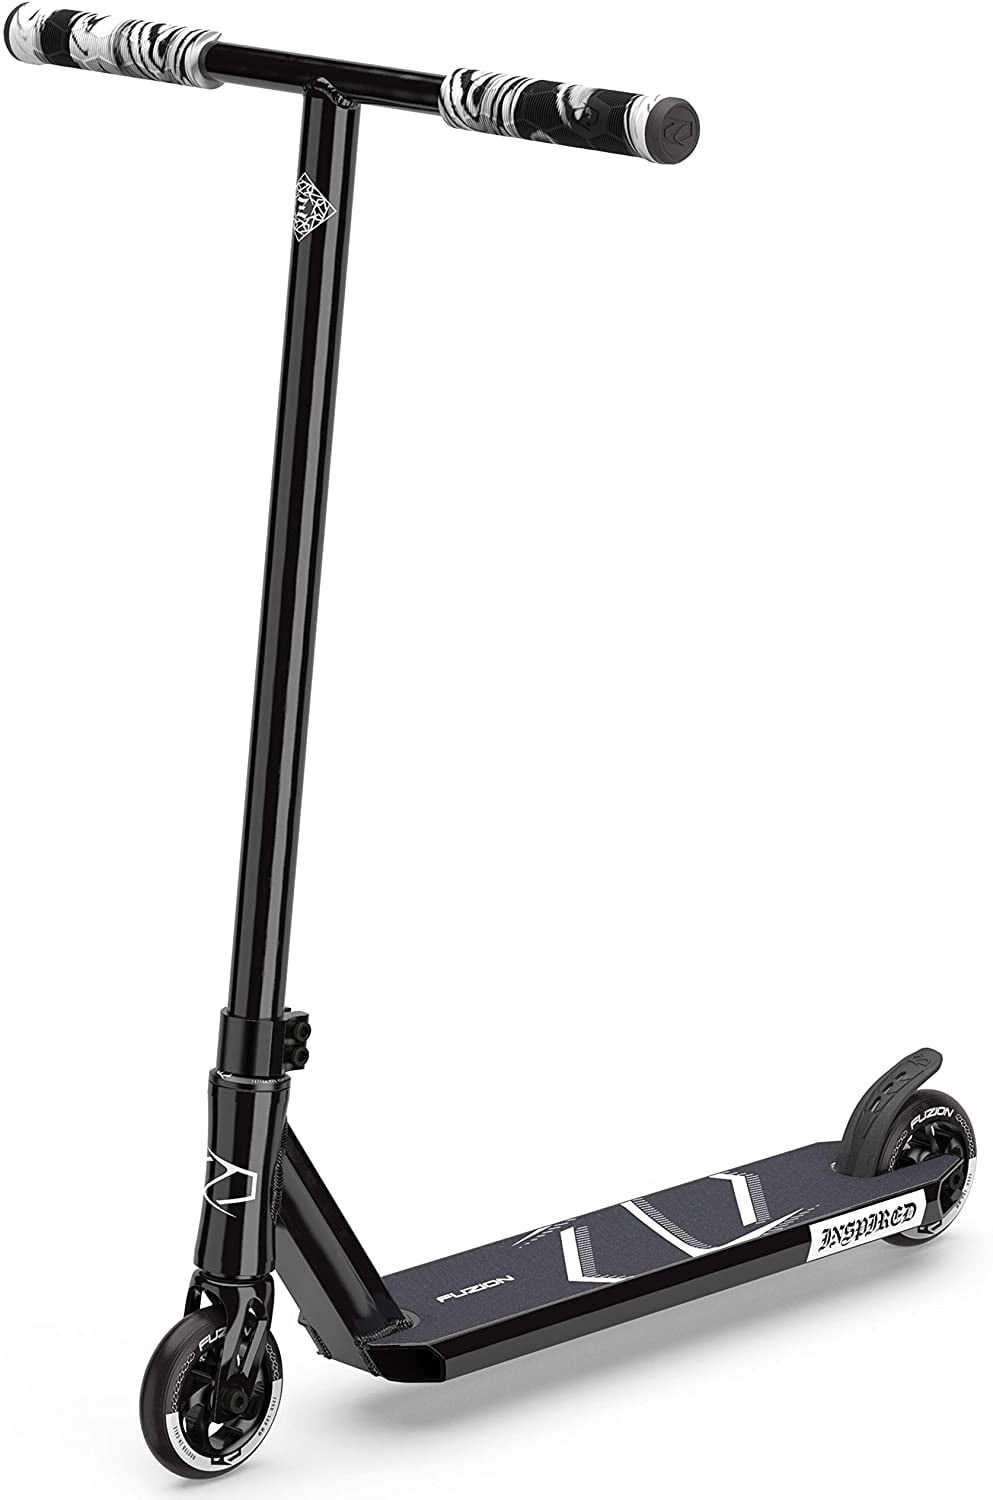 Fuzion Z250 Pro Scooters - Trick Scooter - Intermediate and Beginner